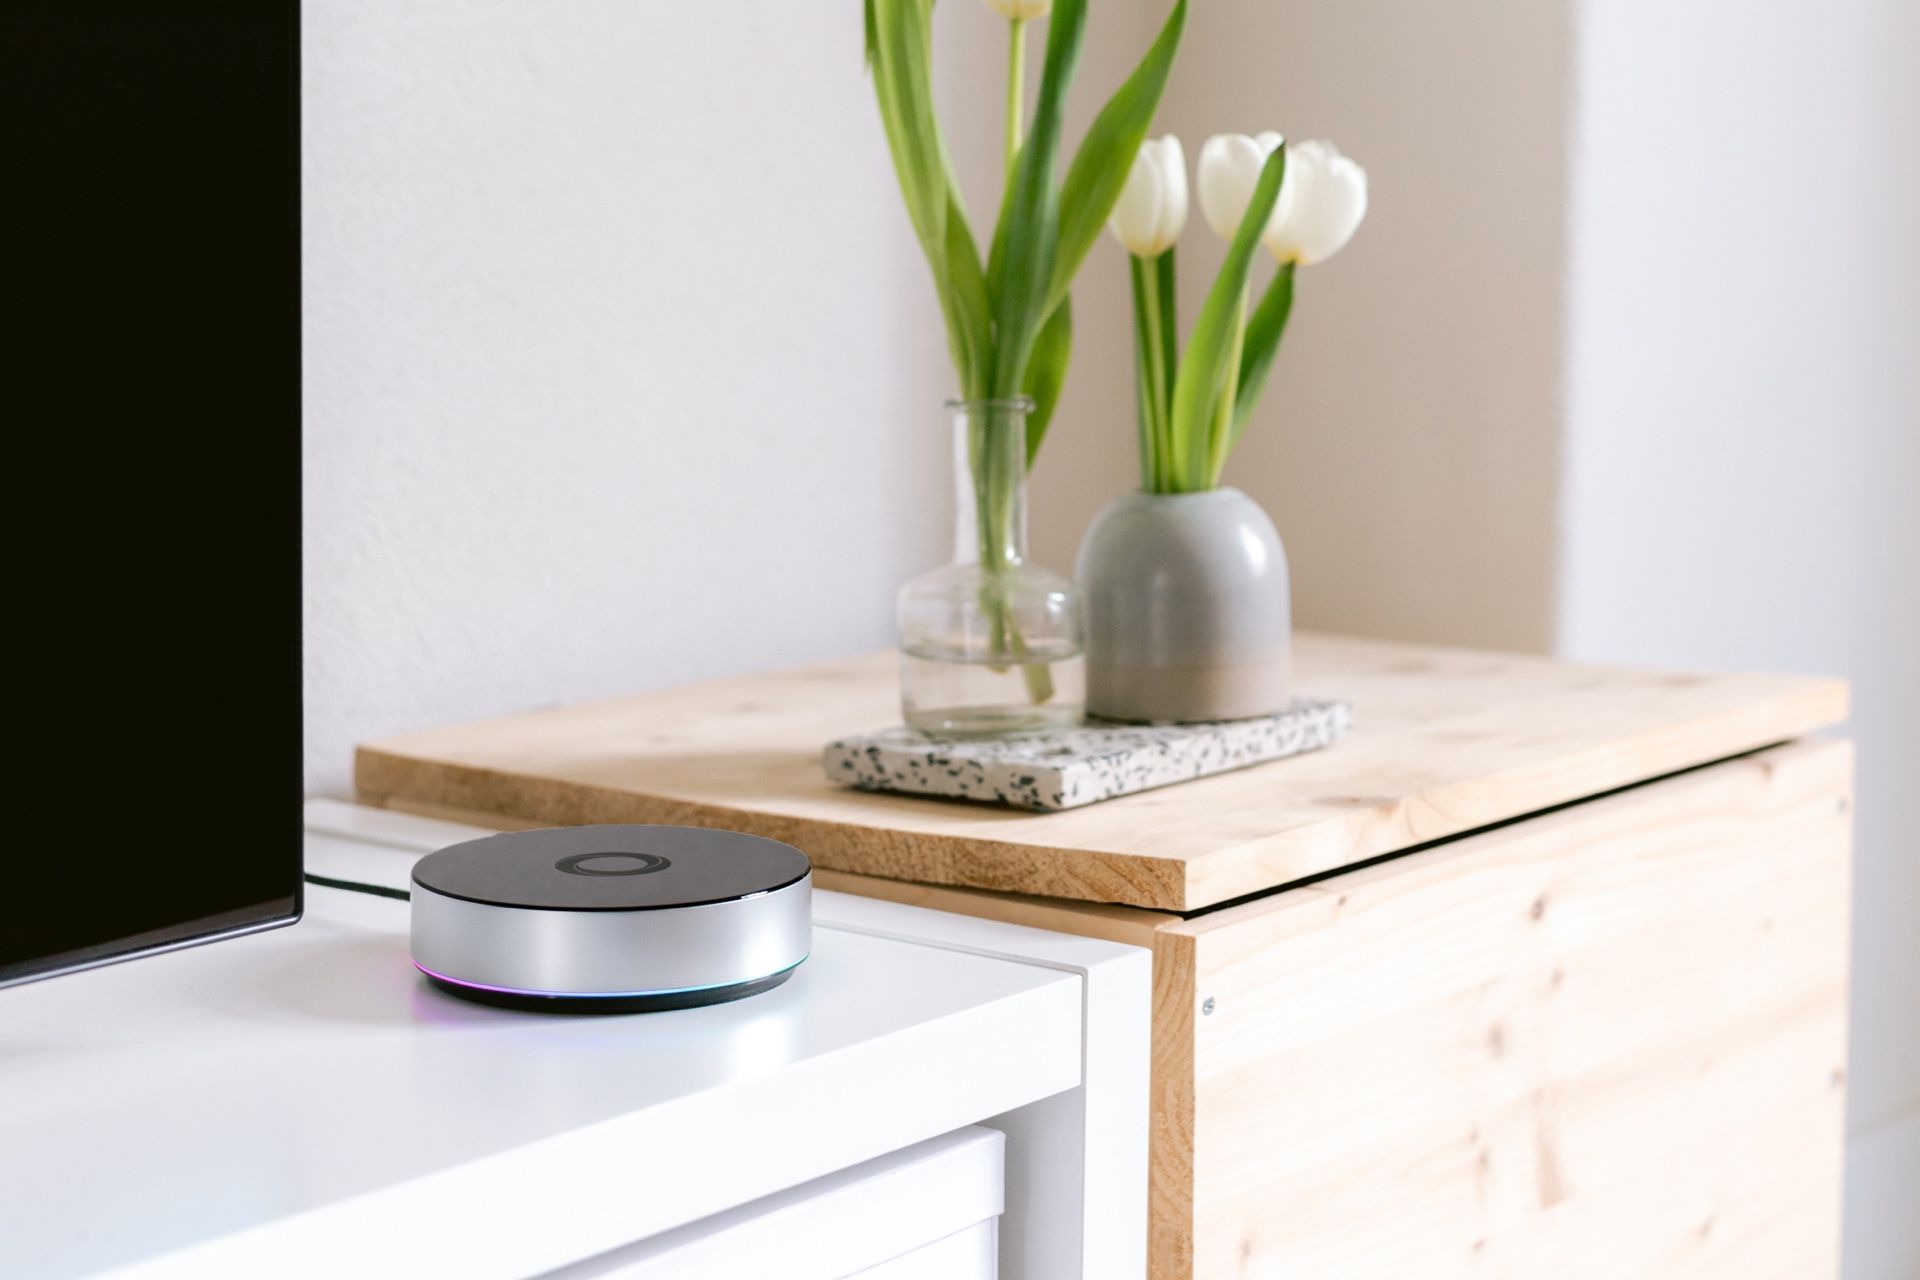 Homey, Europe’s Most Popular and Privacy-friendly Smart Home Hub Announces U.S. Retail Launch at CES 2022